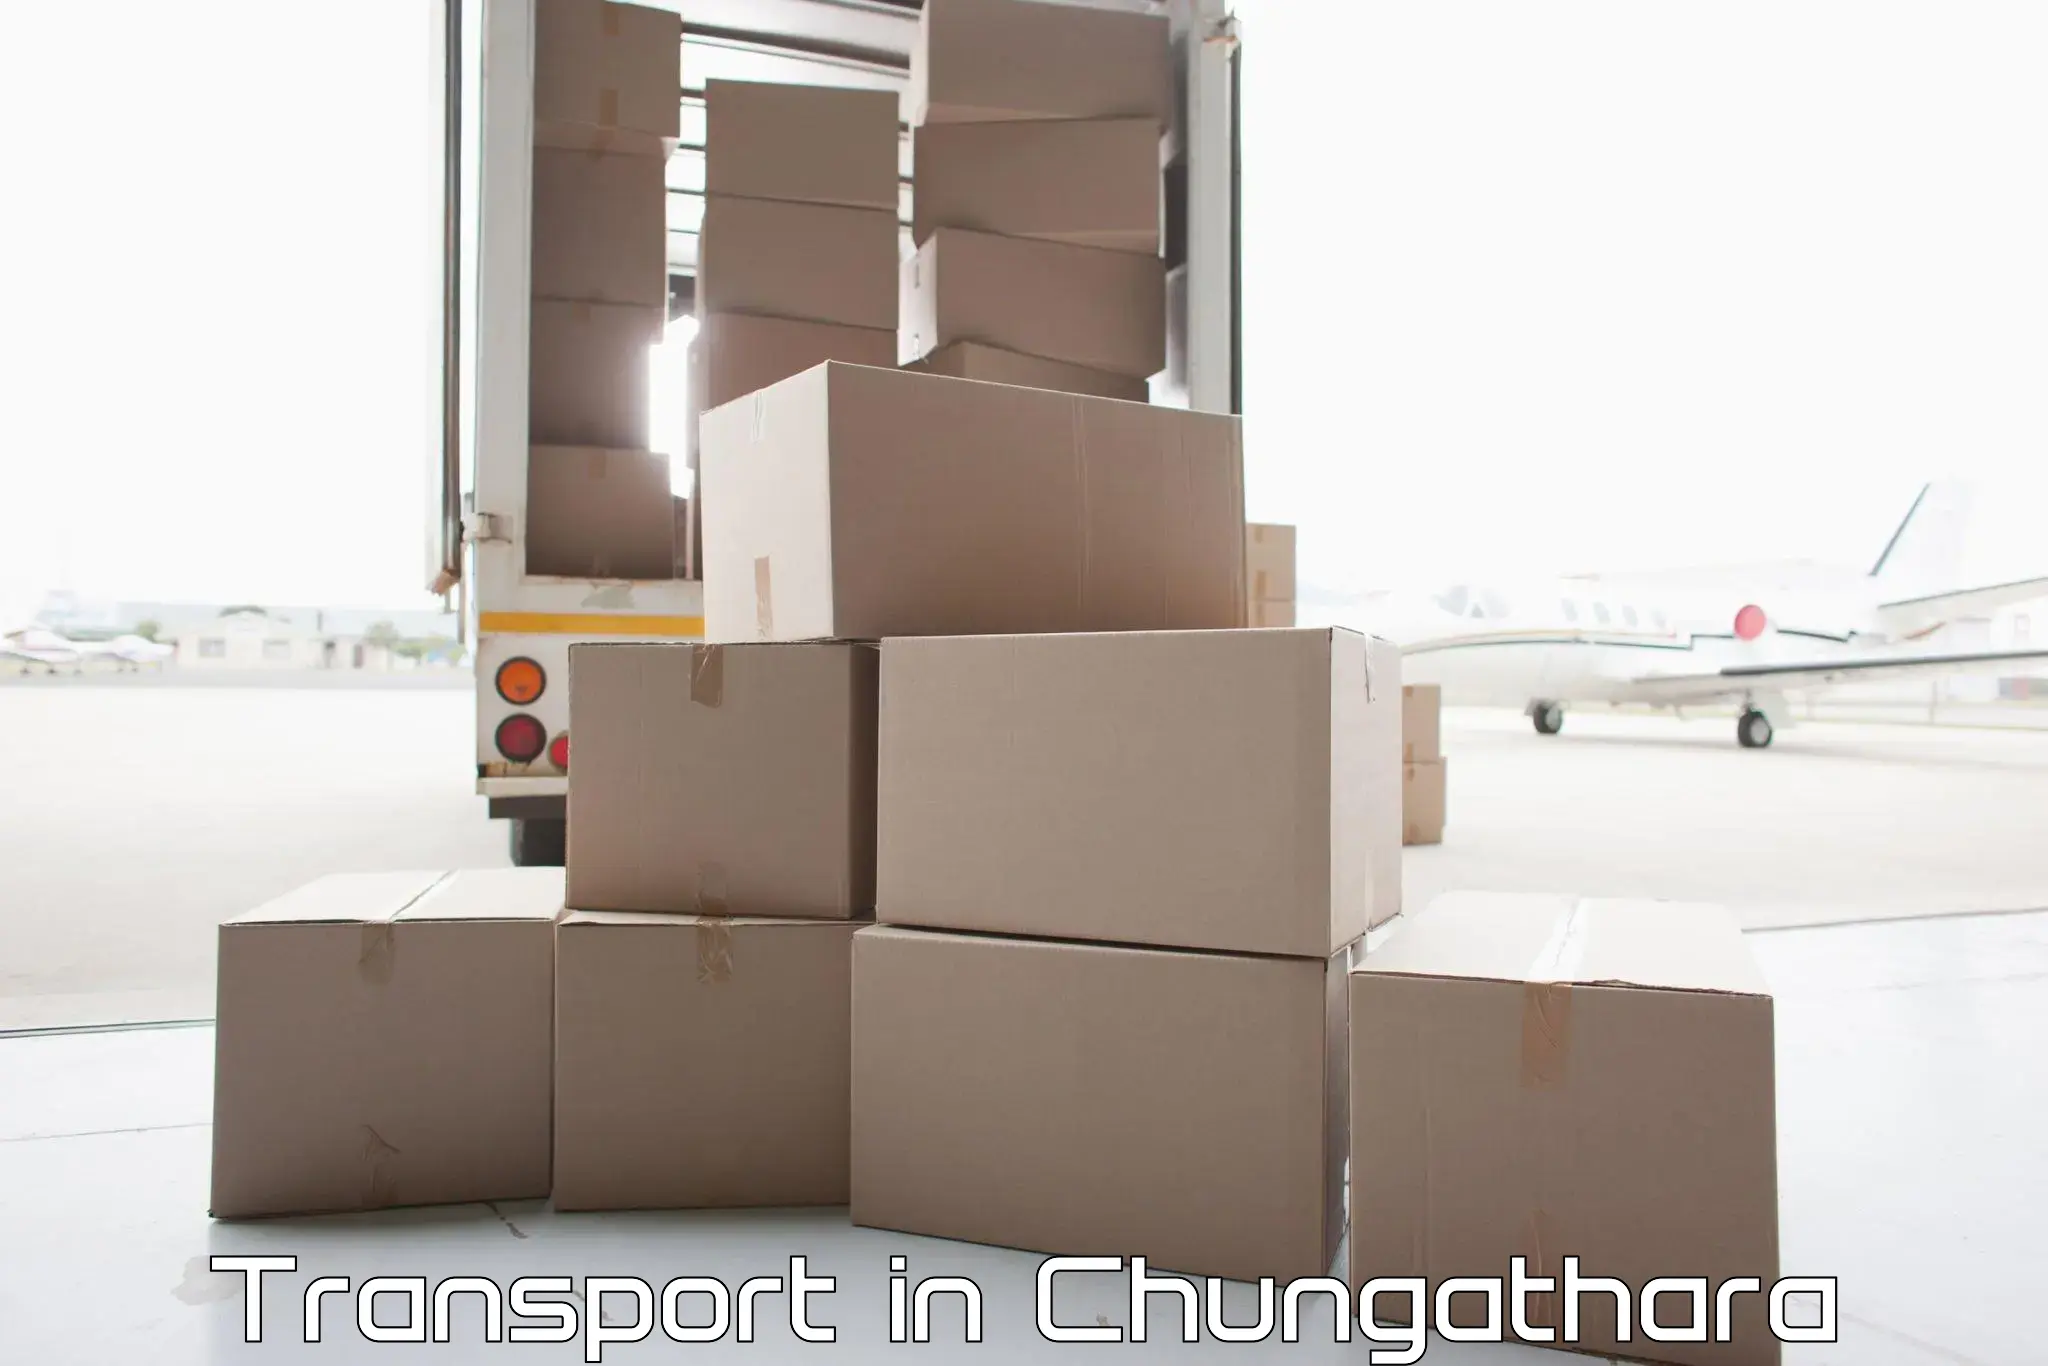 Two wheeler parcel service in Chungathara